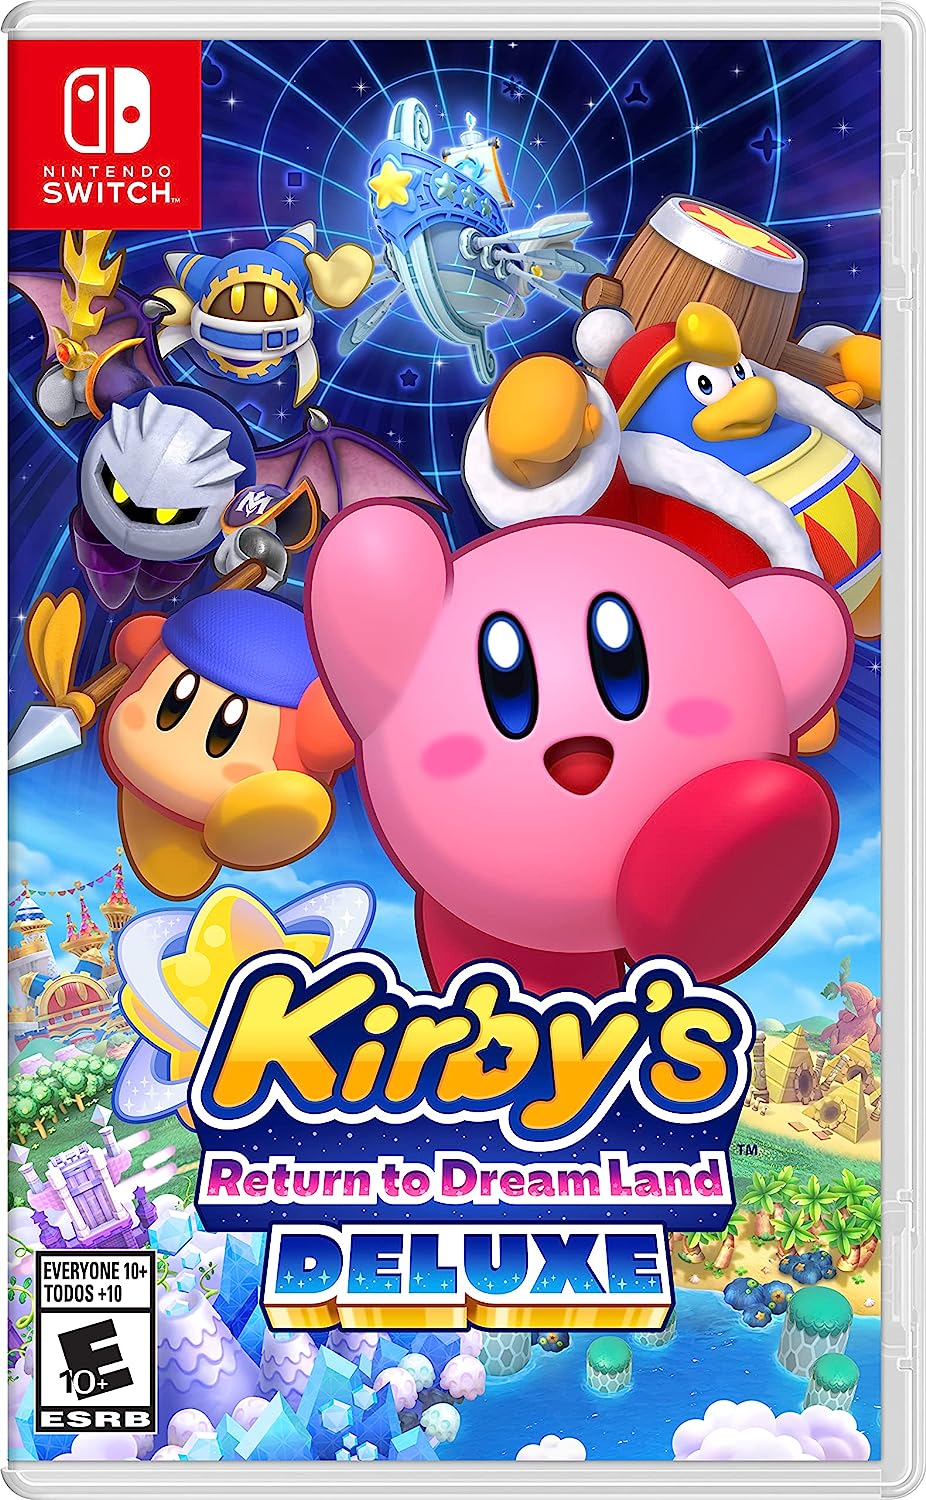 Kirby's Dream Buffet - Nintendo Switch (No Game Cards / Only